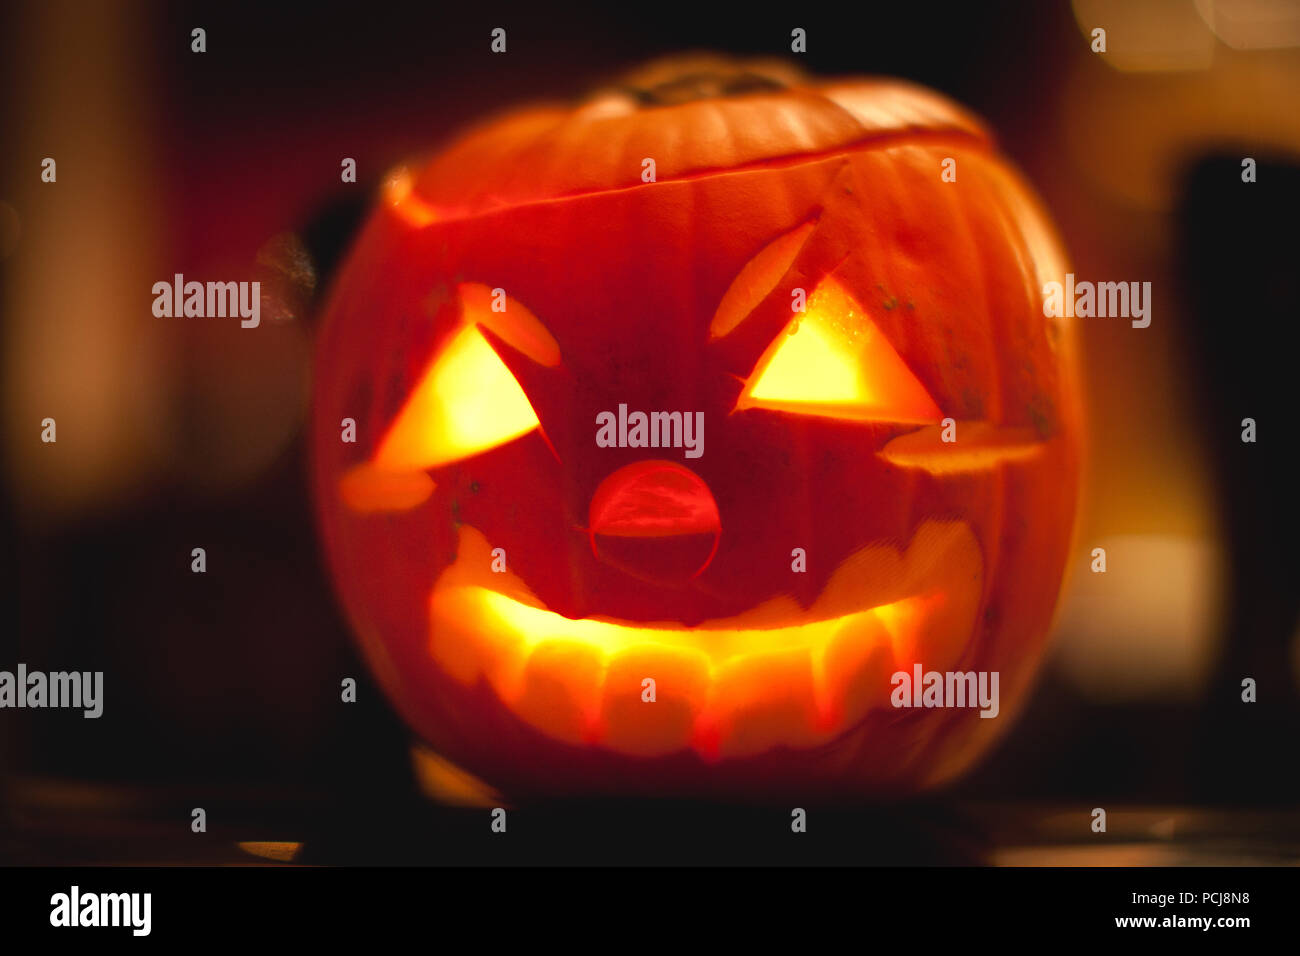 Carving out a pumpkin or Jack-O-Lantern to form a scary face is a Halloween tradition Stock Photo